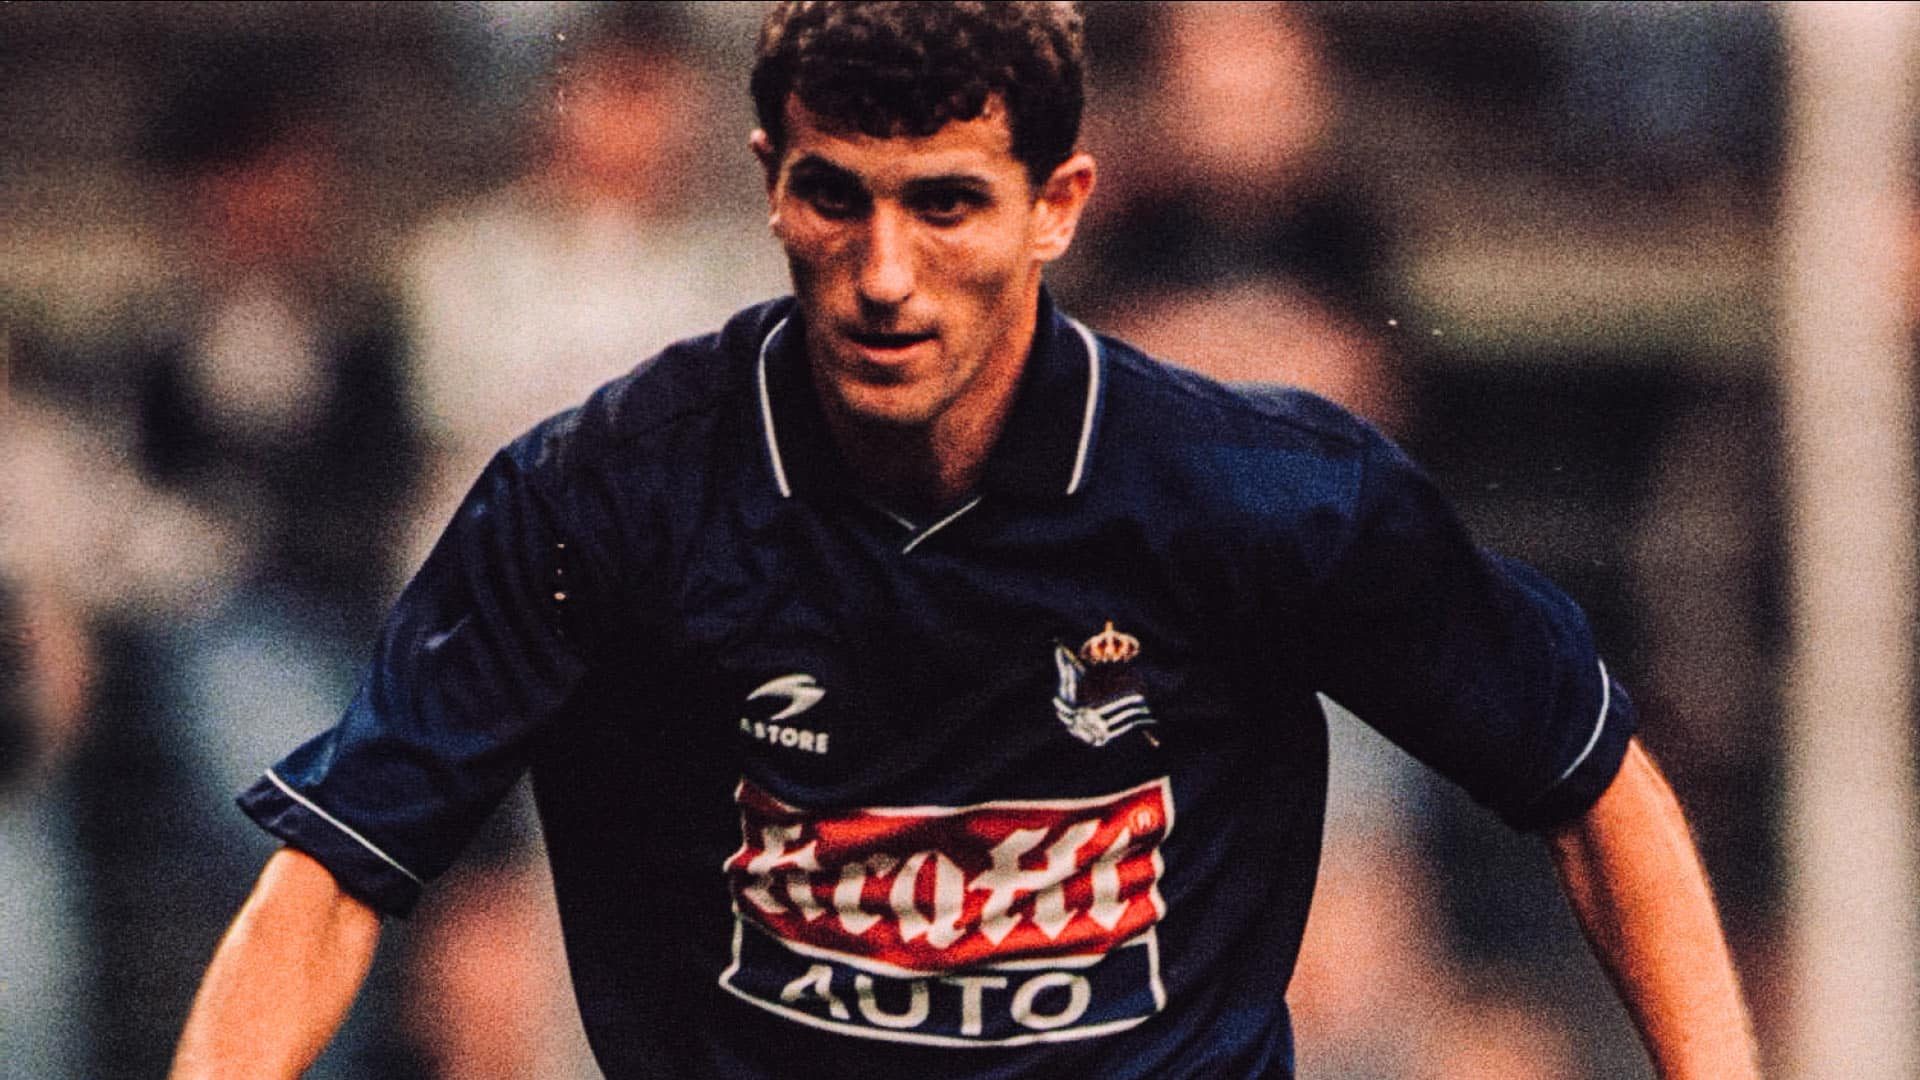 Javi Gracia playing for Real Sociedad in the 1990s. He looks exactly the same as he does now